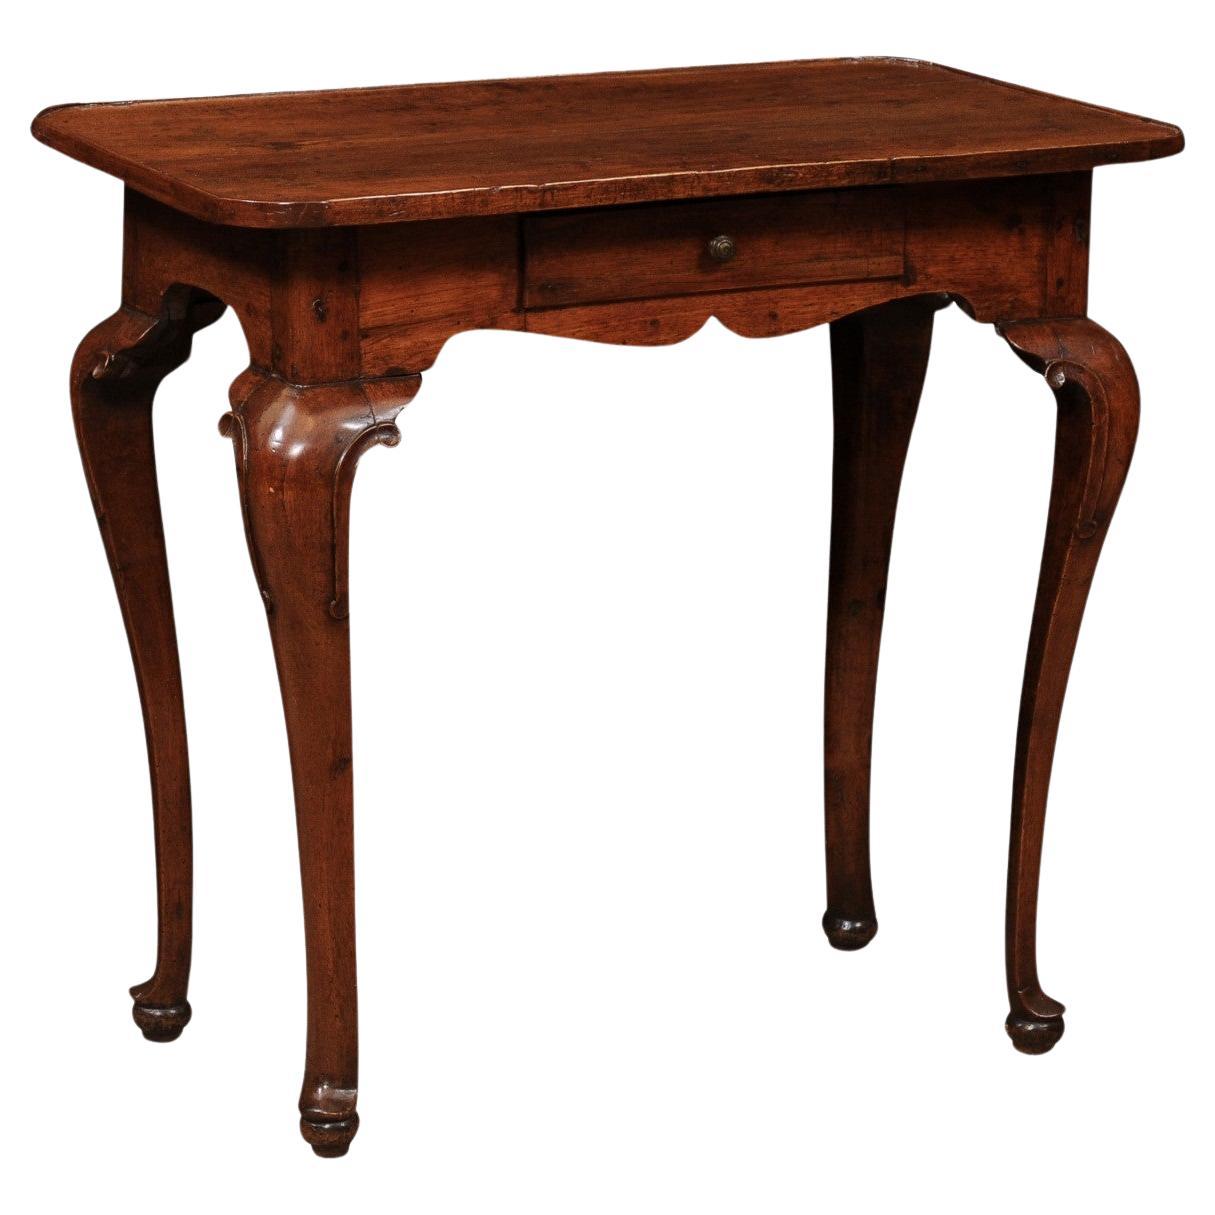 Early 18th Century Italian Walnut Side Table with Tray Top, Drawer, Cabriole Leg For Sale